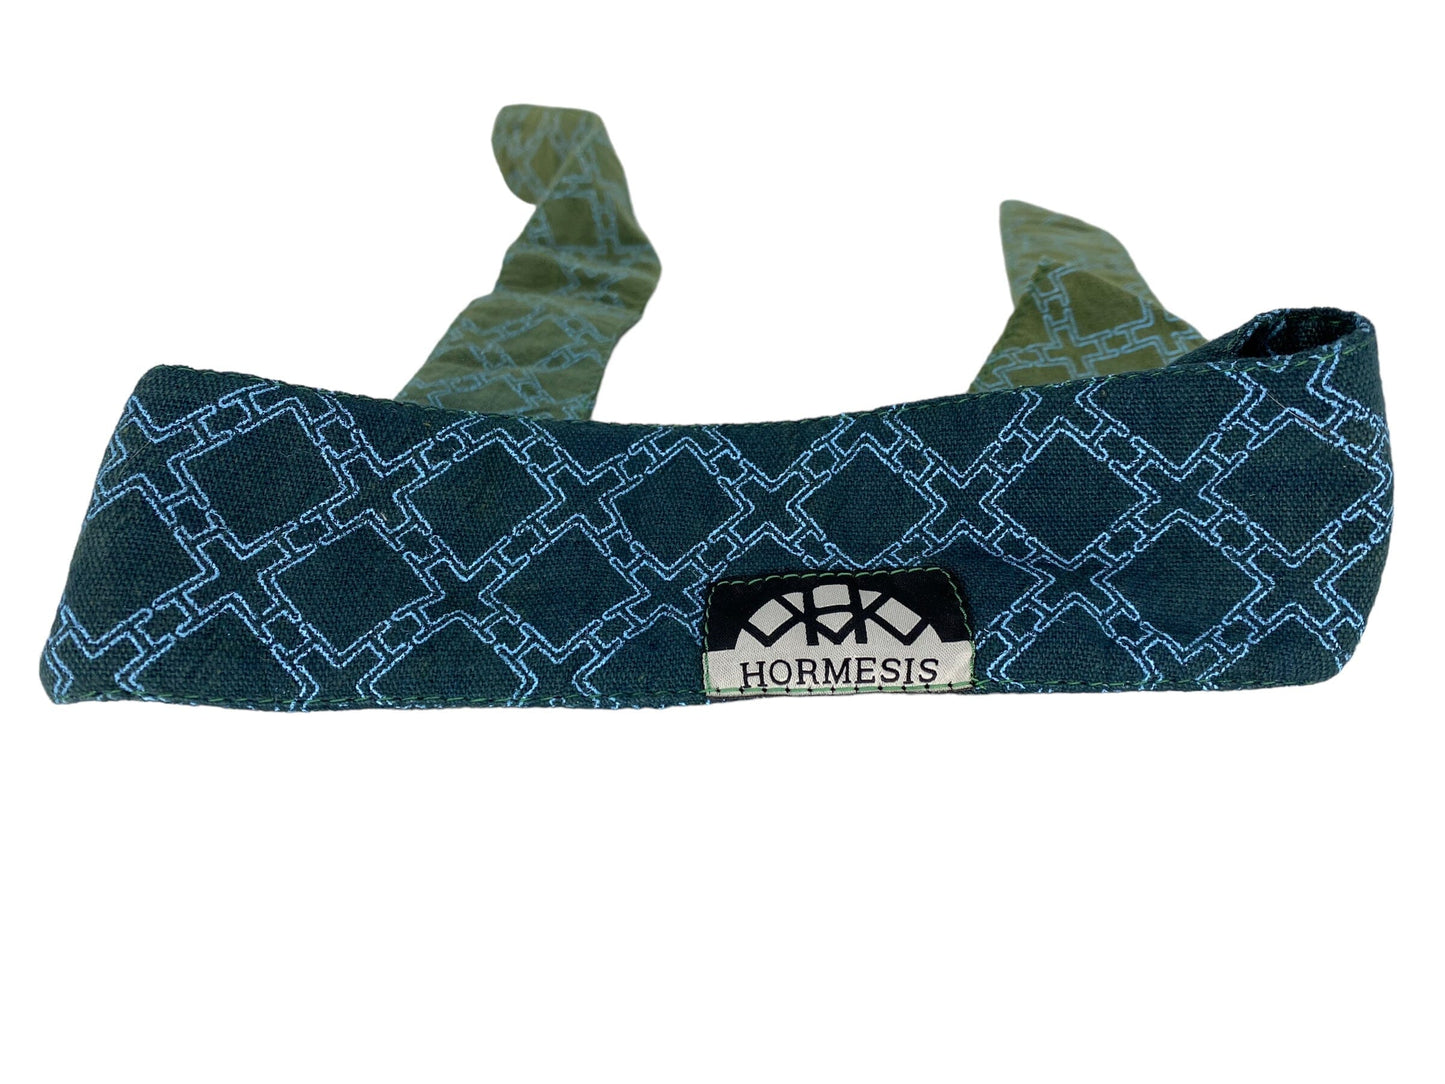 Used Hormesis Headband Paintball Gun from CPXBrosPaintball Buy/Sell/Trade Paintball Markers, New Paintball Guns, Paintball Hoppers, Paintball Masks, and Hormesis Headbands